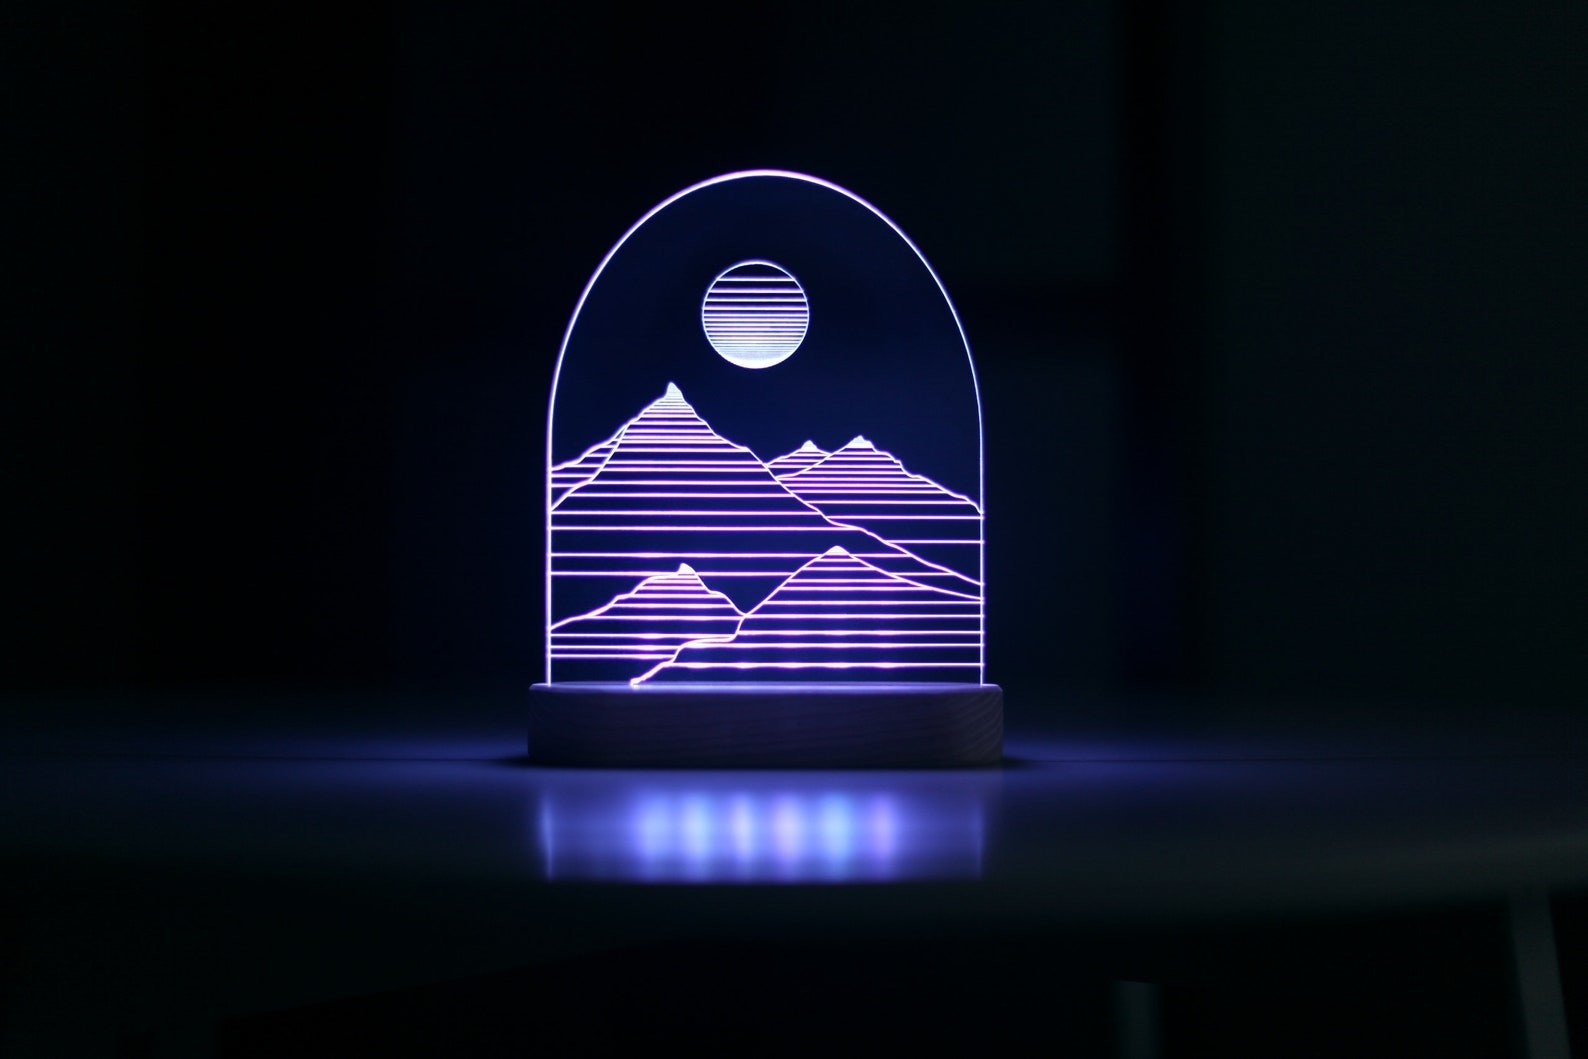 the lamp displaying mountains and the moon in purple